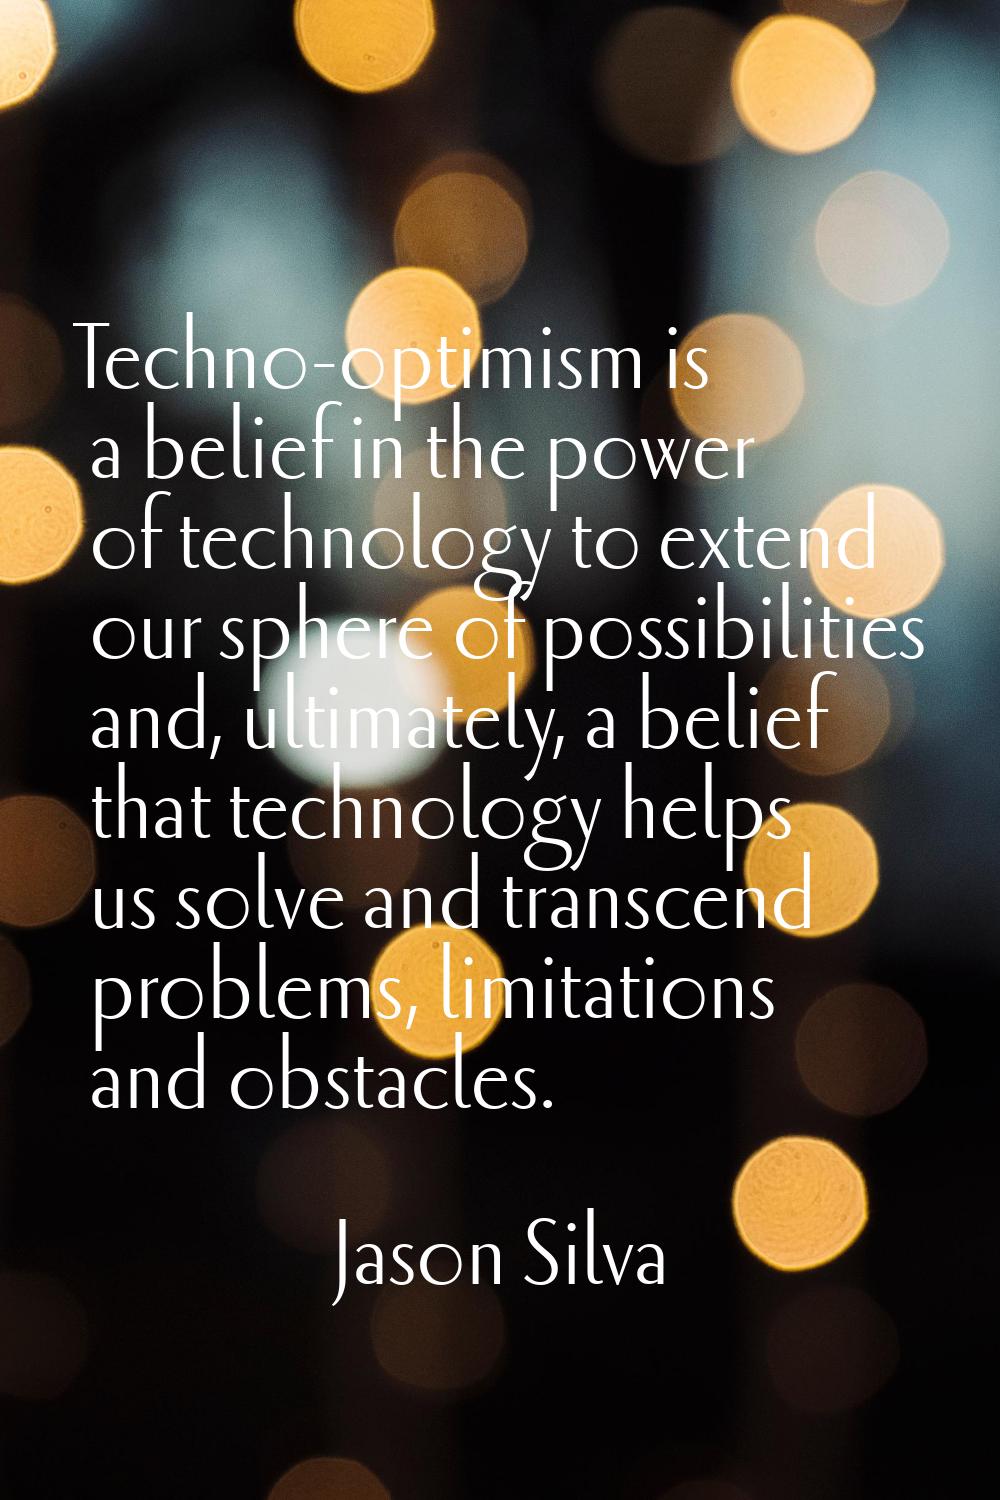 Techno-optimism is a belief in the power of technology to extend our sphere of possibilities and, u